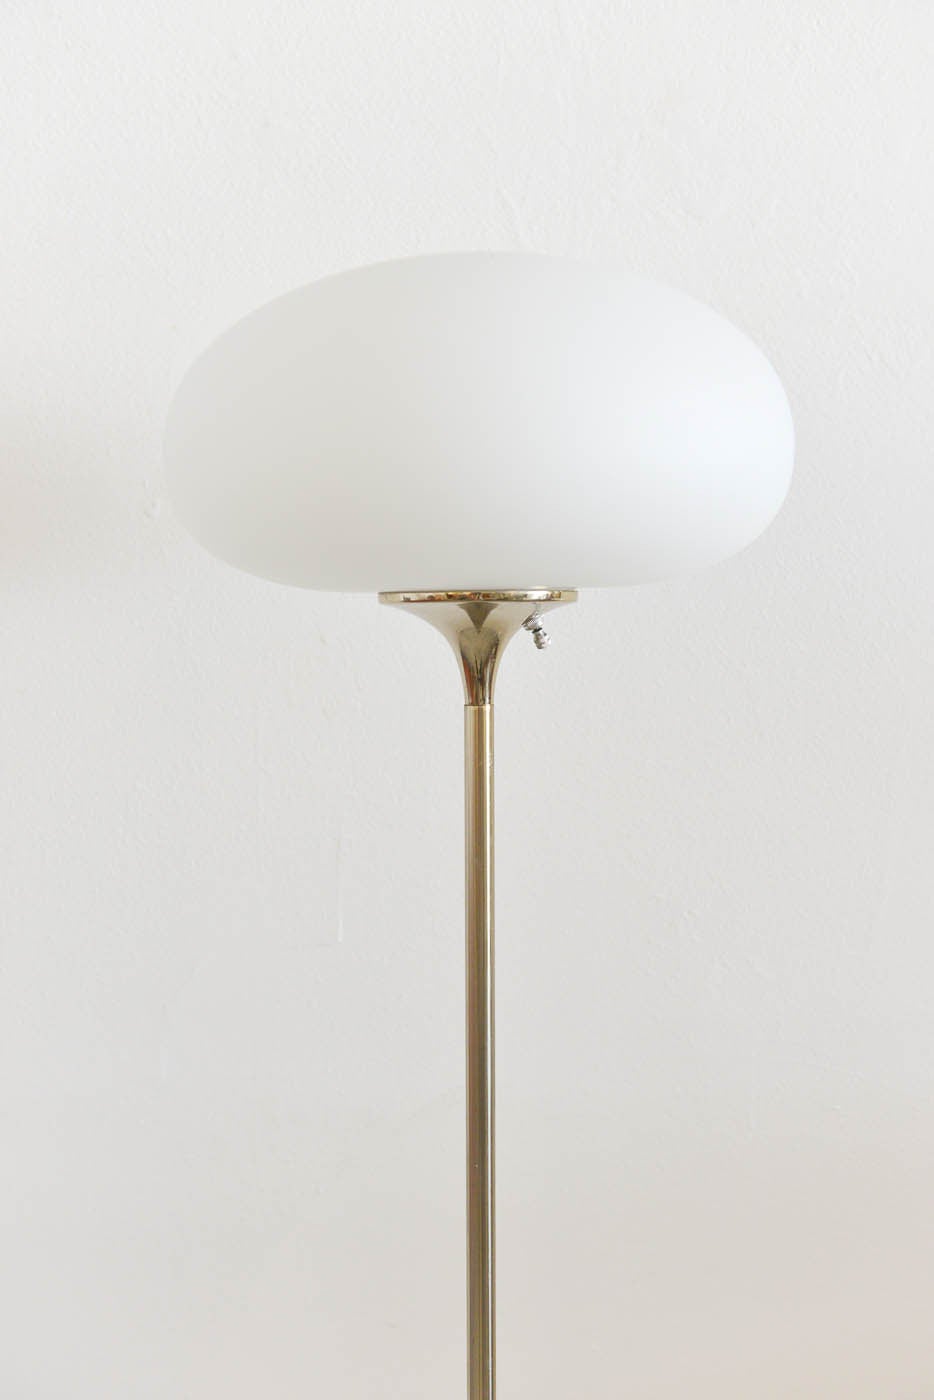 Original Laurel standing mushroom floor lamp in excellent vintage condition, the chrome is beautifully preserved with near perfect shine, no rust or pitting. Great opaque shade, no chips or cracks and original label on the inside of the porcelain